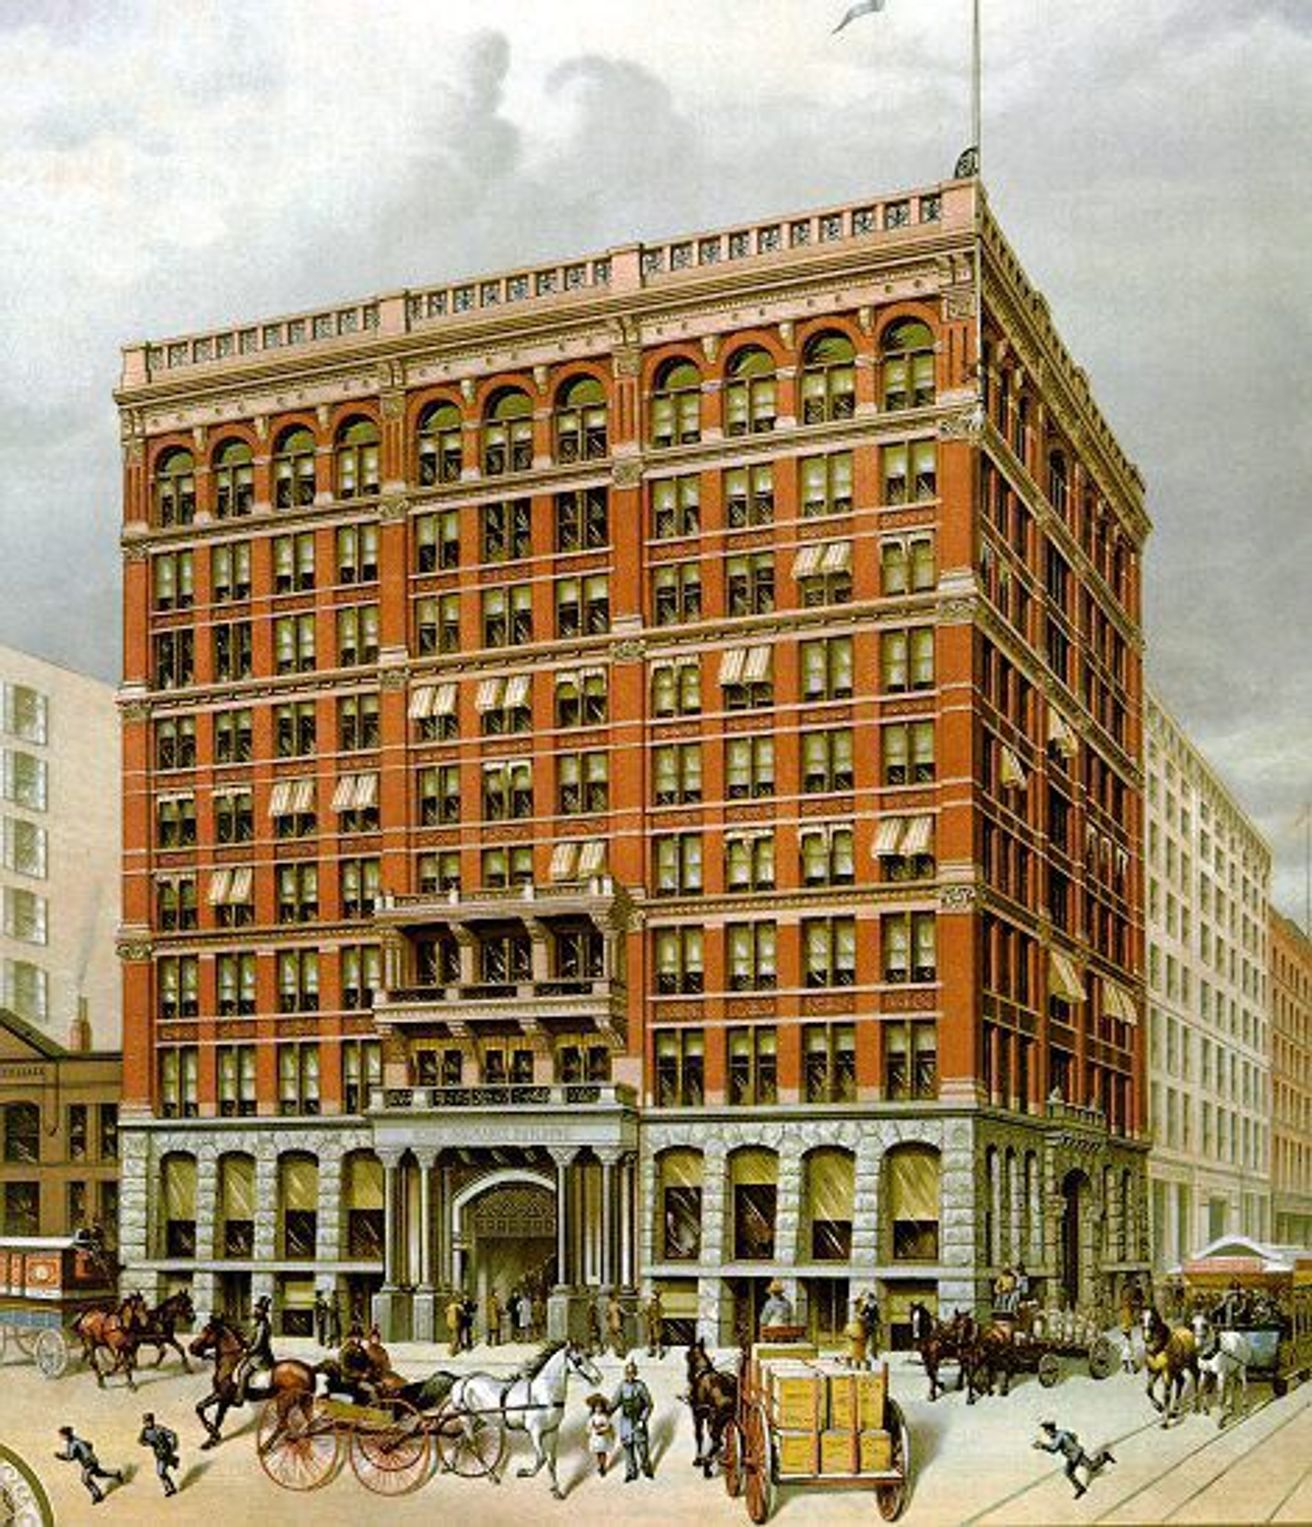 Home Insurance Building, the first metal-framed building and first skyscraper